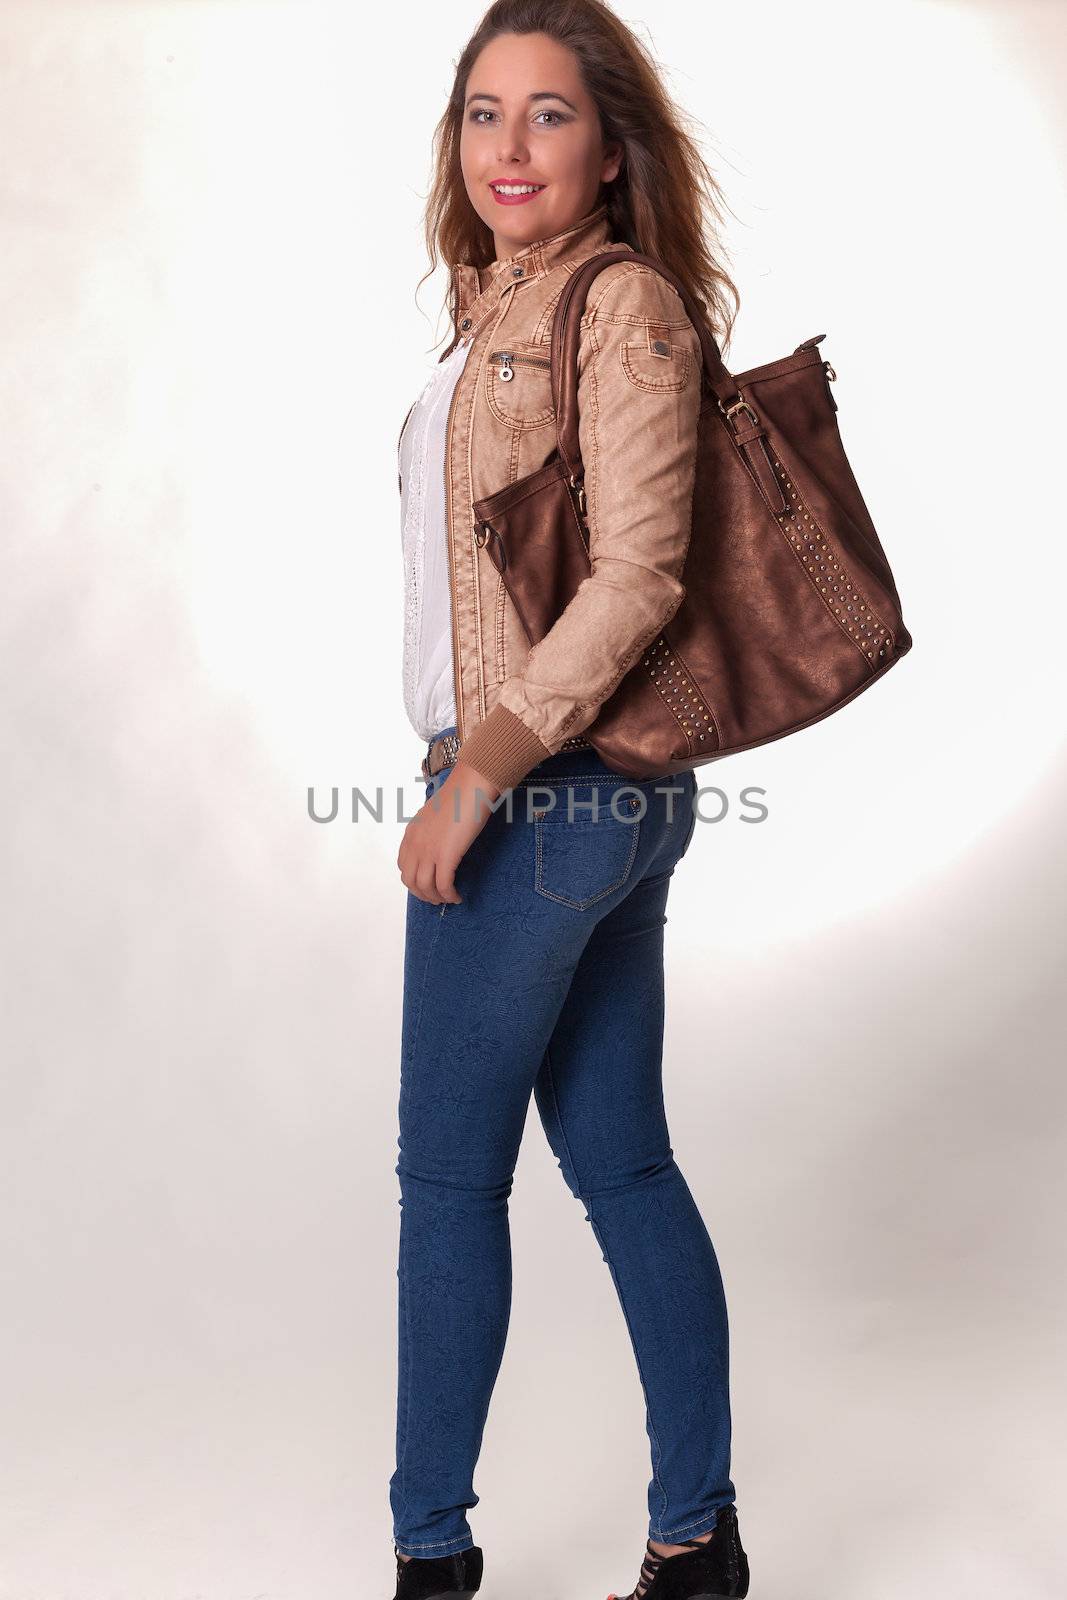 Attractive trendy young woman with long brunette hair and a handbag over her shoulder turning to look back at the camera with a lovely smile